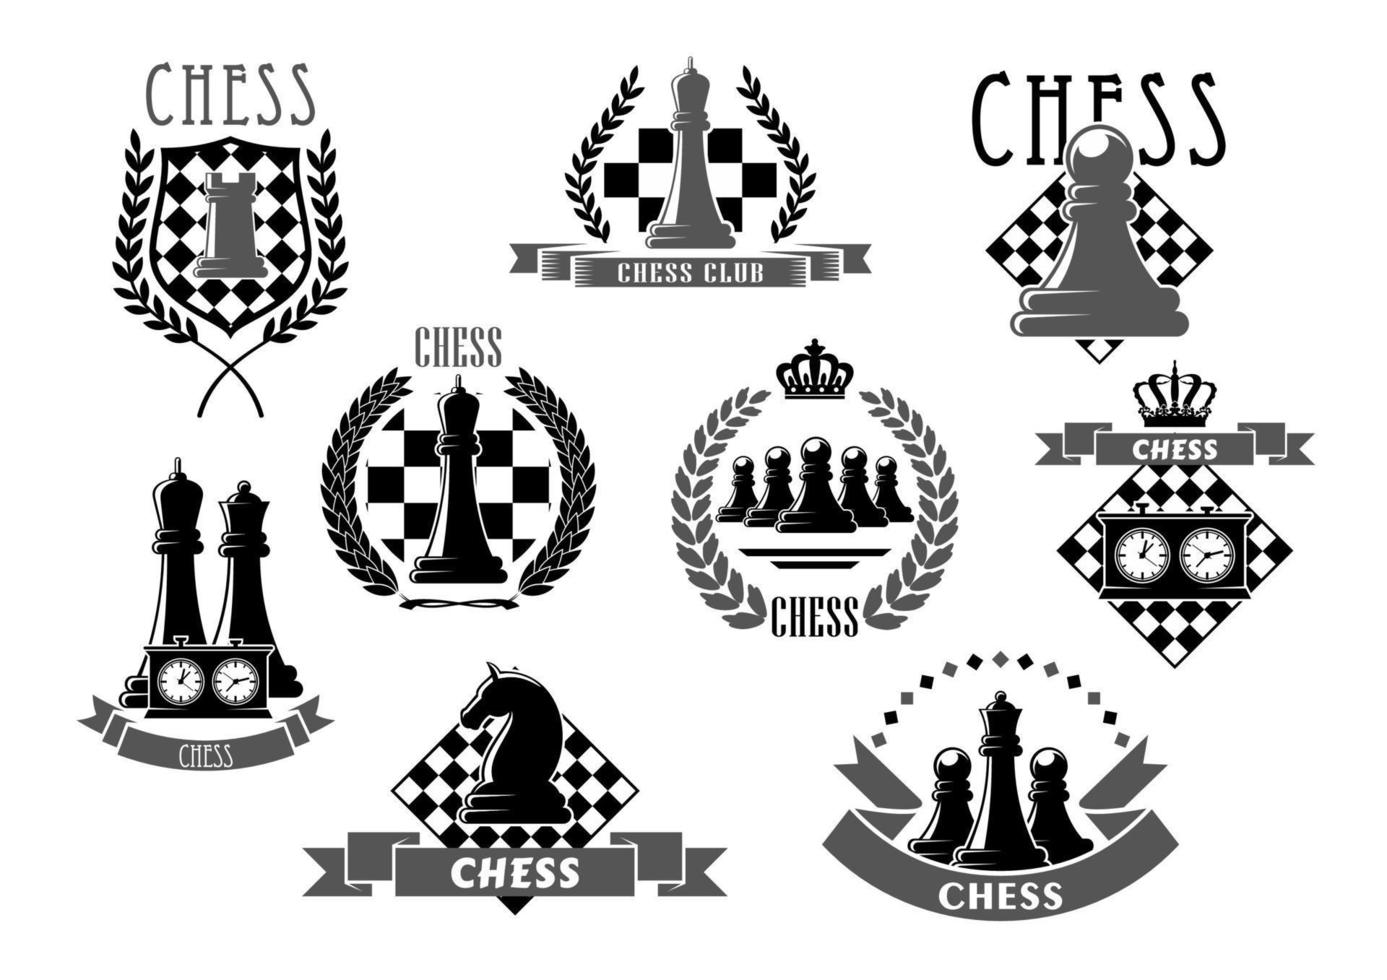 Chess club emblems and vector icons